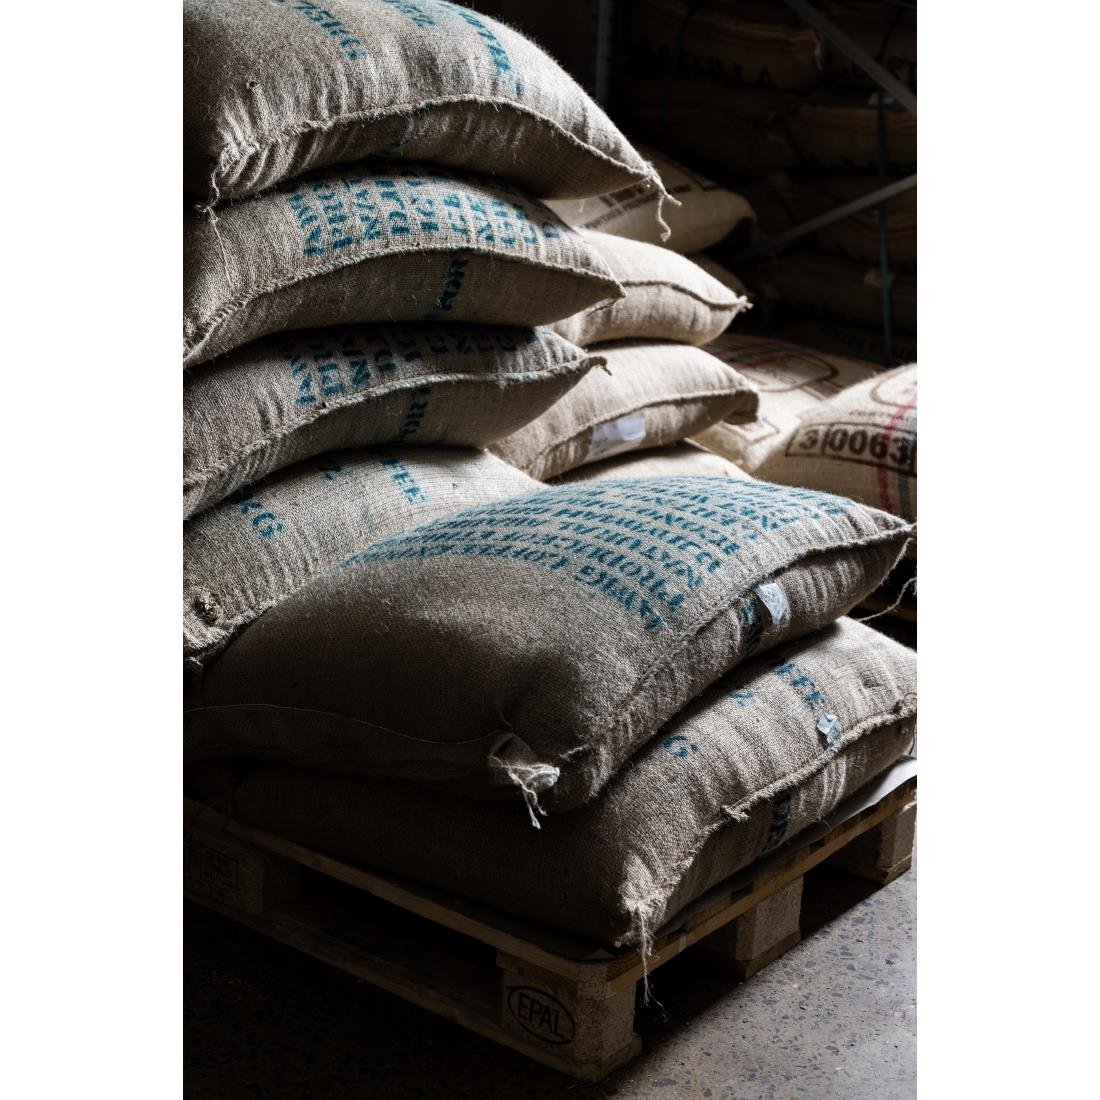 HS526 Beaumont No.1 Classico Coffee Omni Grind 1kg